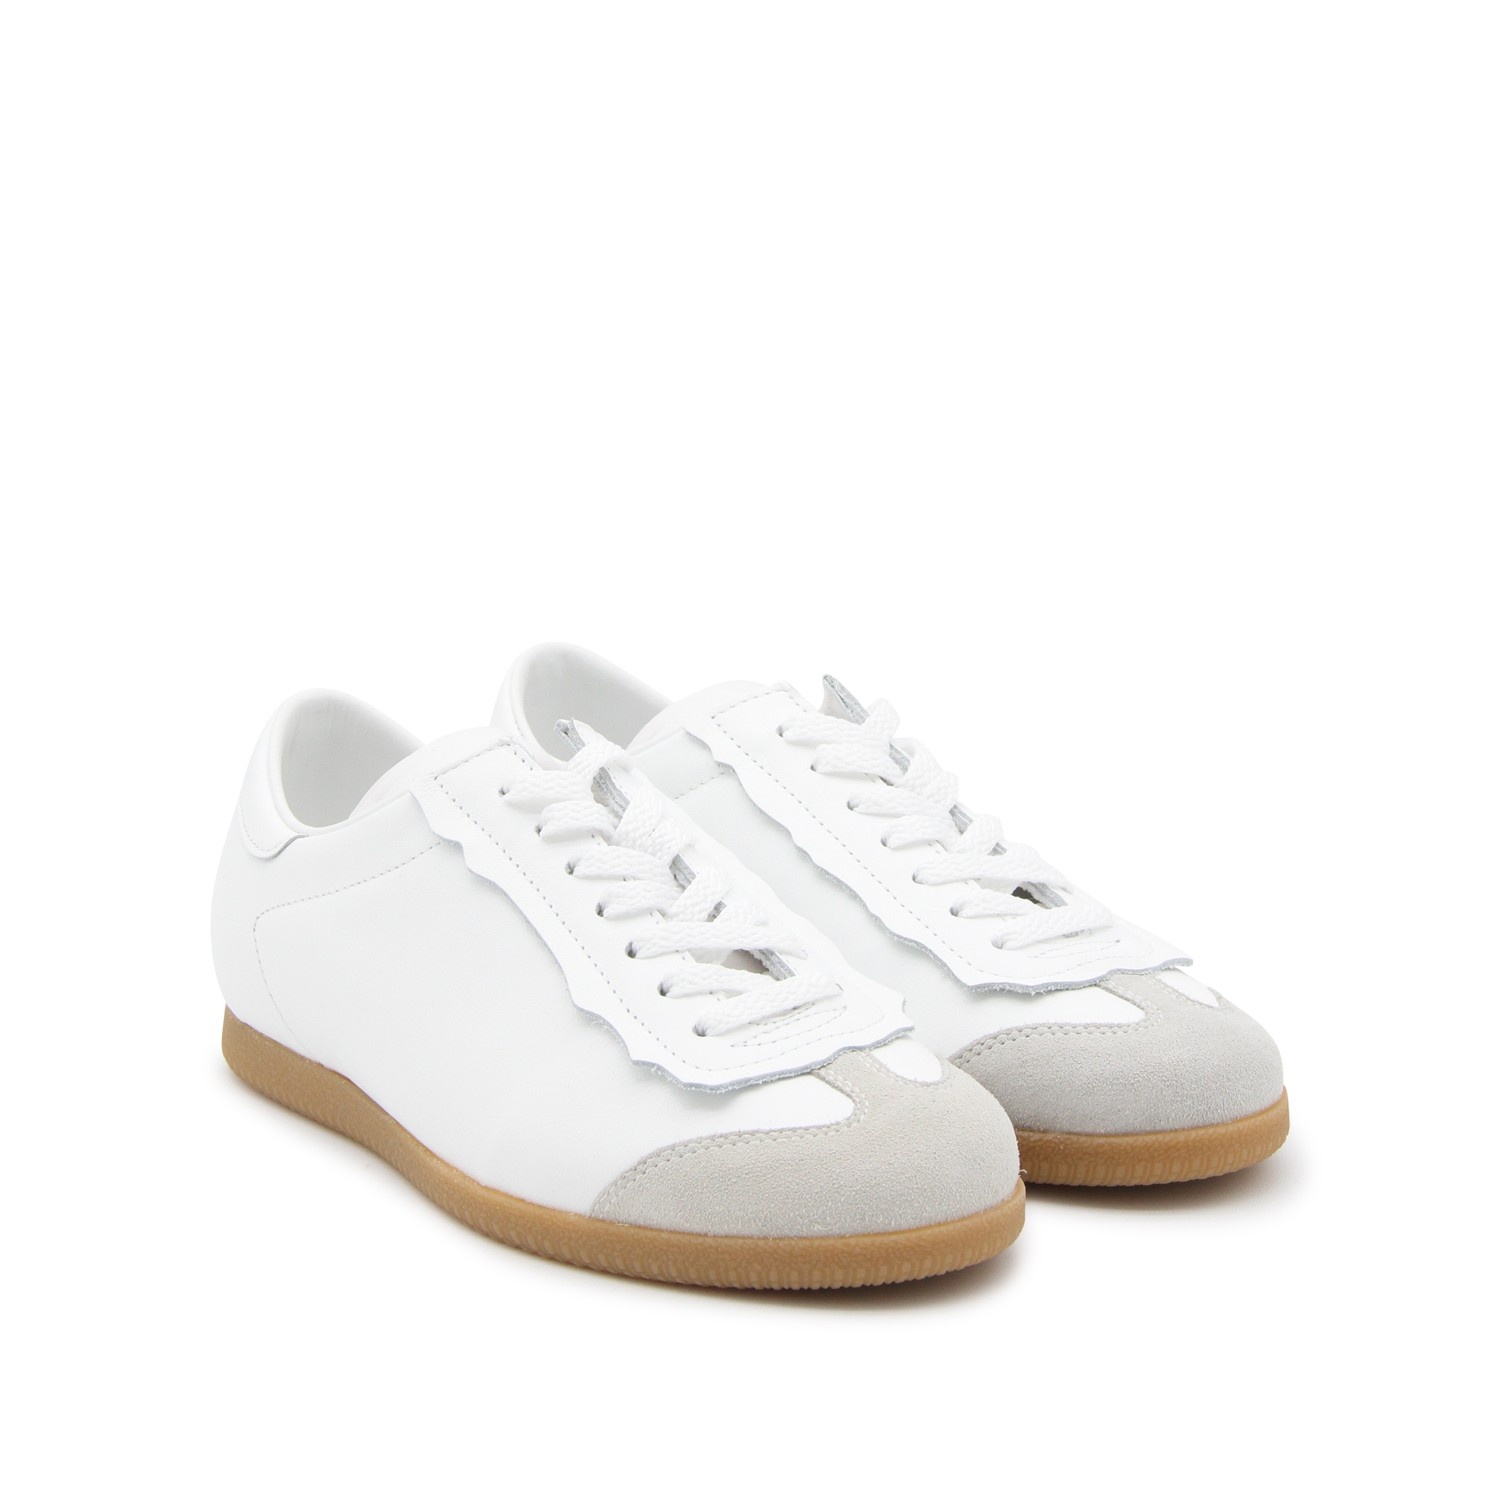 WHITE LEATHER AND GREY SUEDE SNEAKERS - 2